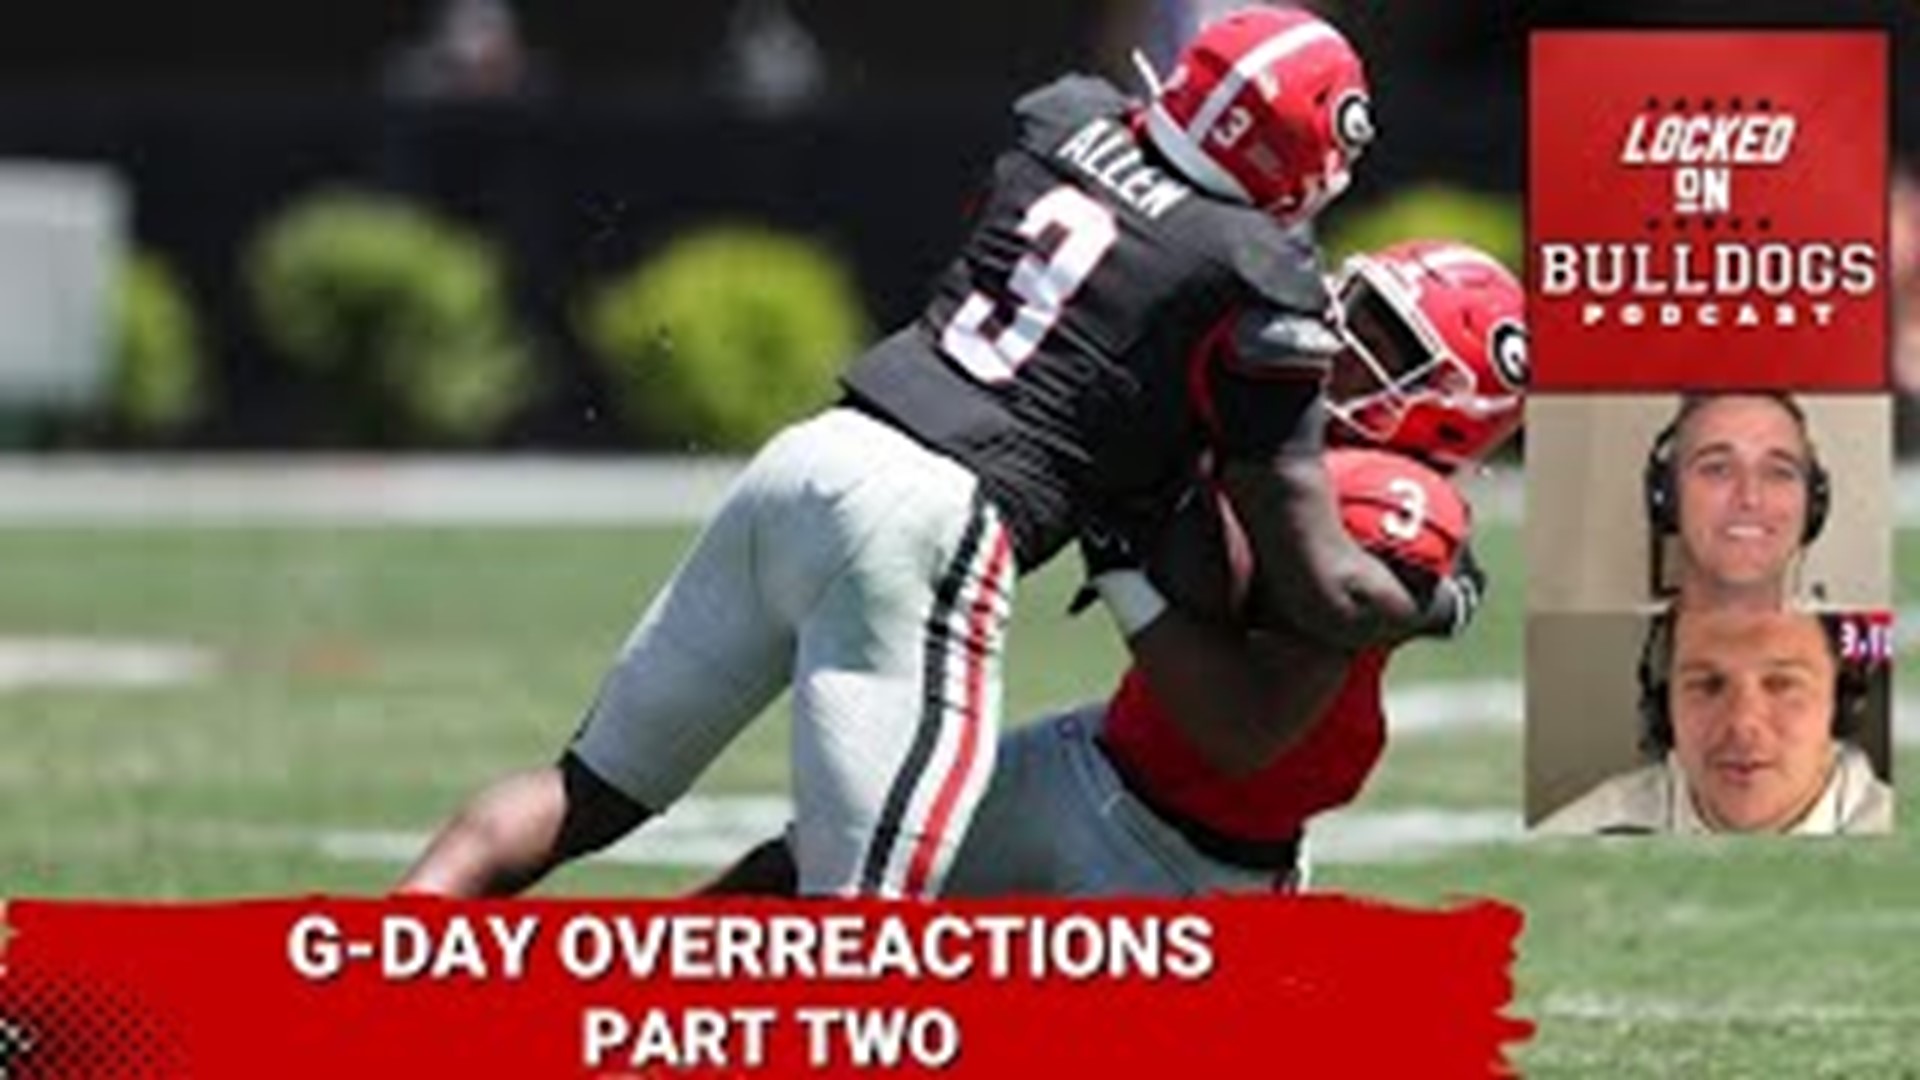 Georgia Football fans overreact to G-Day 2024. Georgia's Spring game shows MUCH improved defense